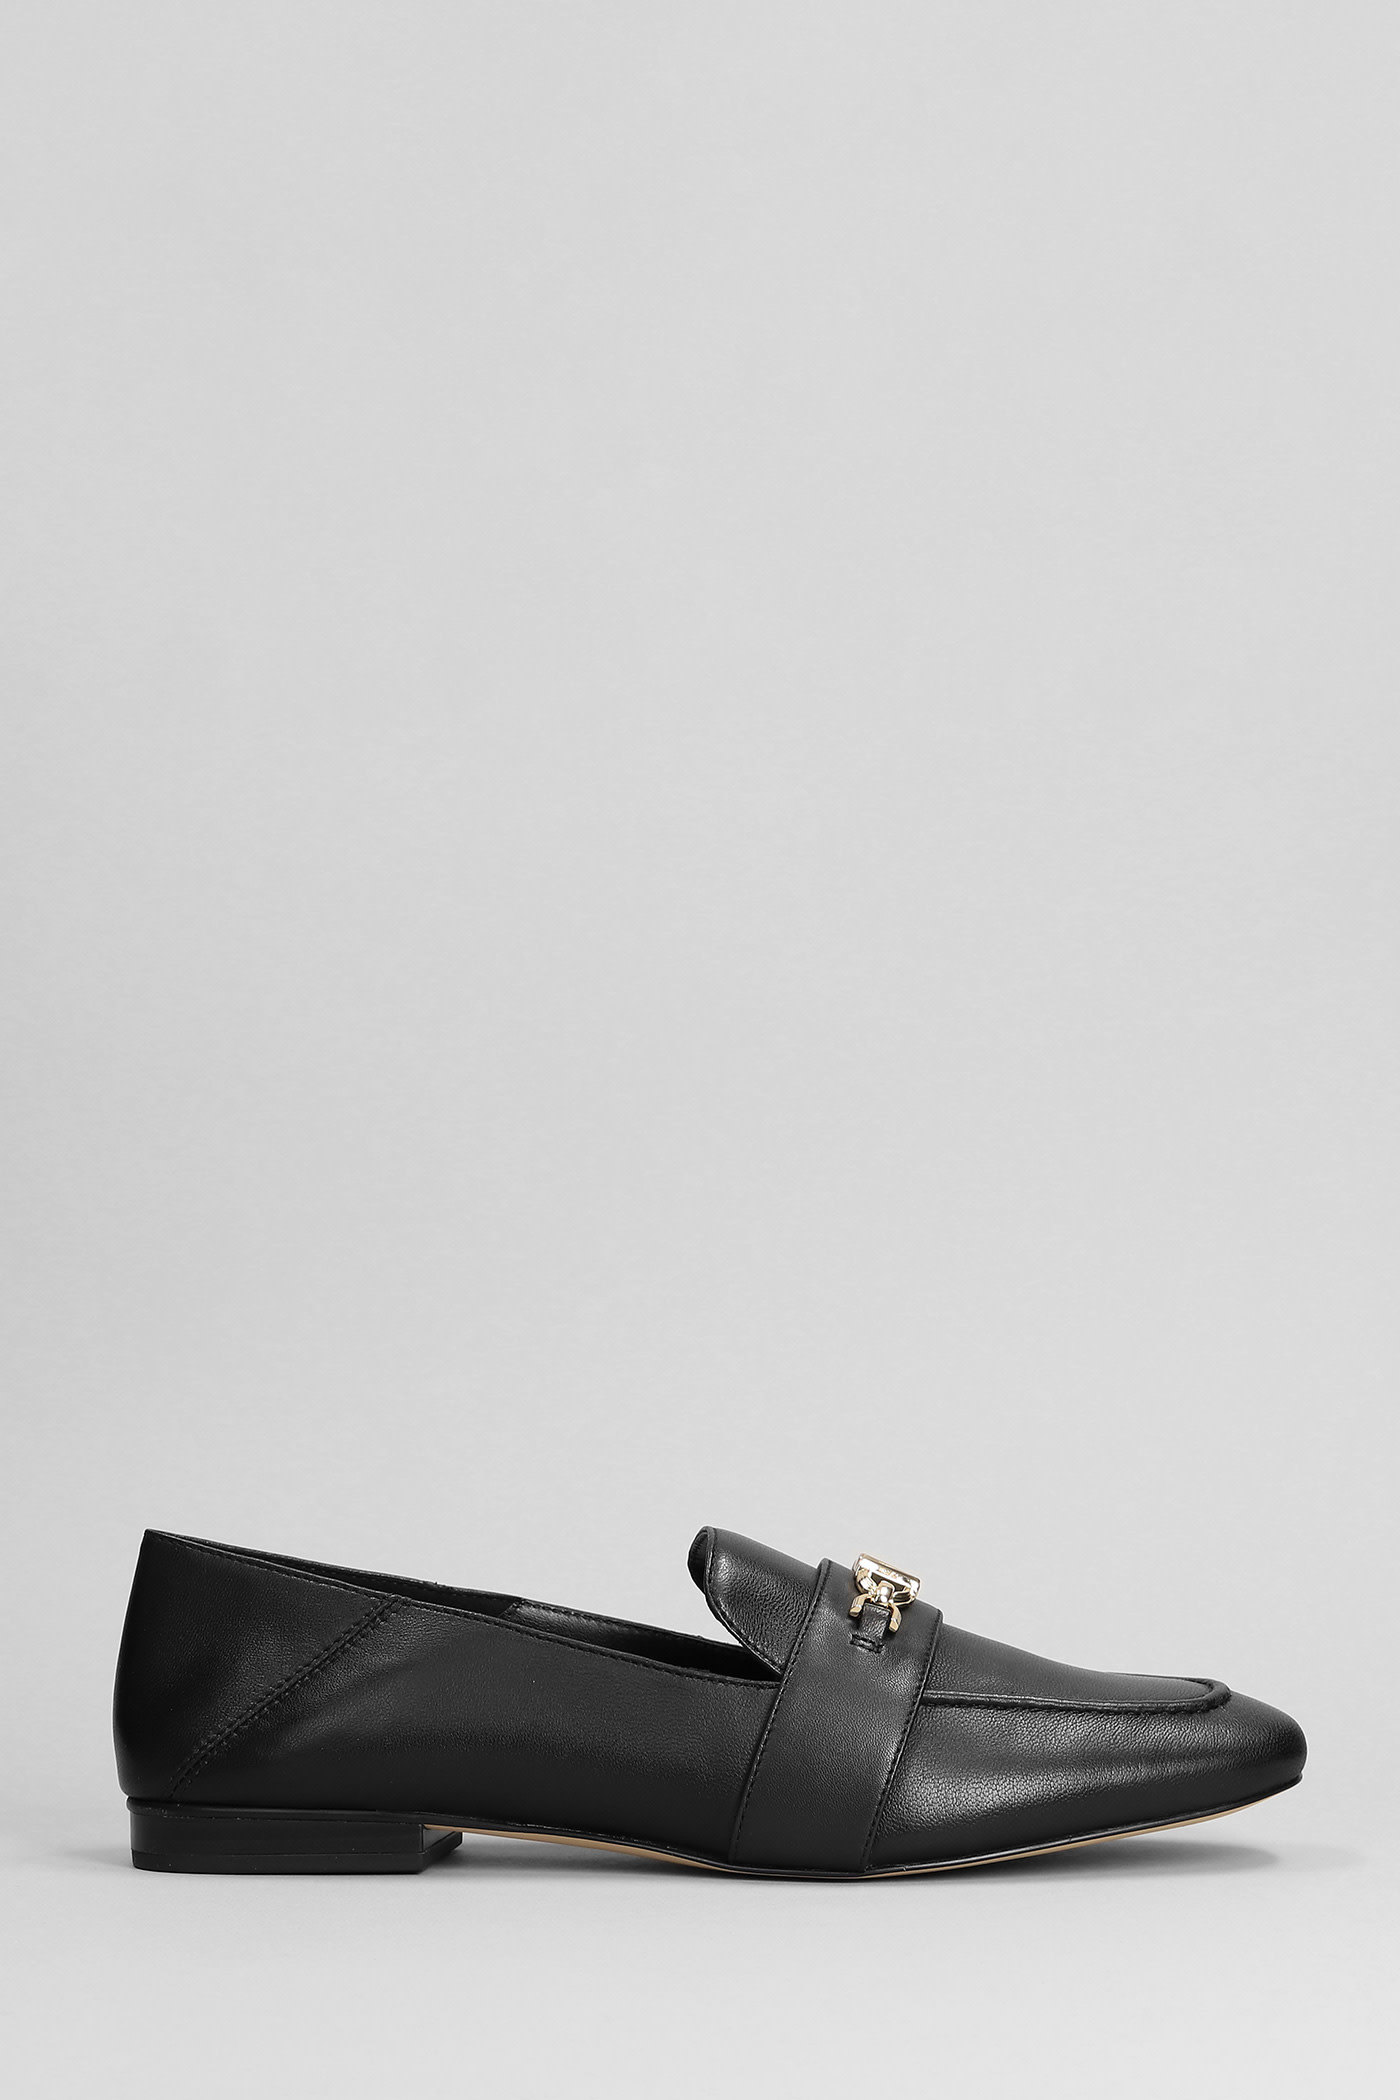 MICHAEL KORS TIFFANIE LOAFER LOAFERS IN BLACK LEATHER